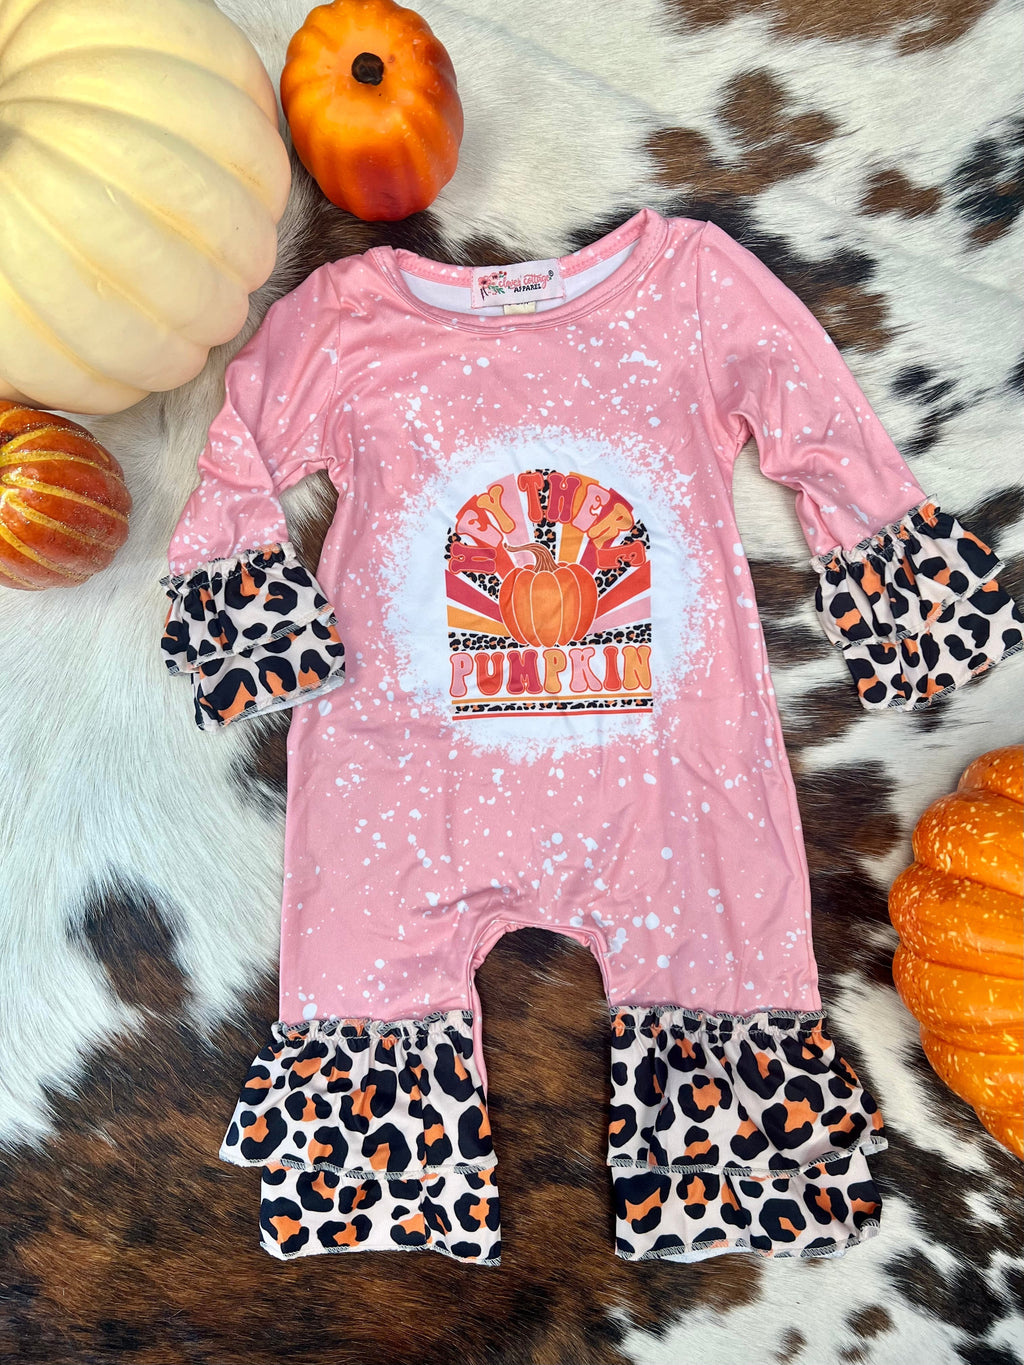 Welcome the fall season in style with our Hey There Pumpkin Romper! This playful one-piece features a fun leopard print trim, a unique pink acid spatter look, a scoop neckline, and a button snap leg closure. Enjoy the butter soft material that'll keep you feeling comfy and looking cute all day long. Perfect for dancing through the changing leaves in October!